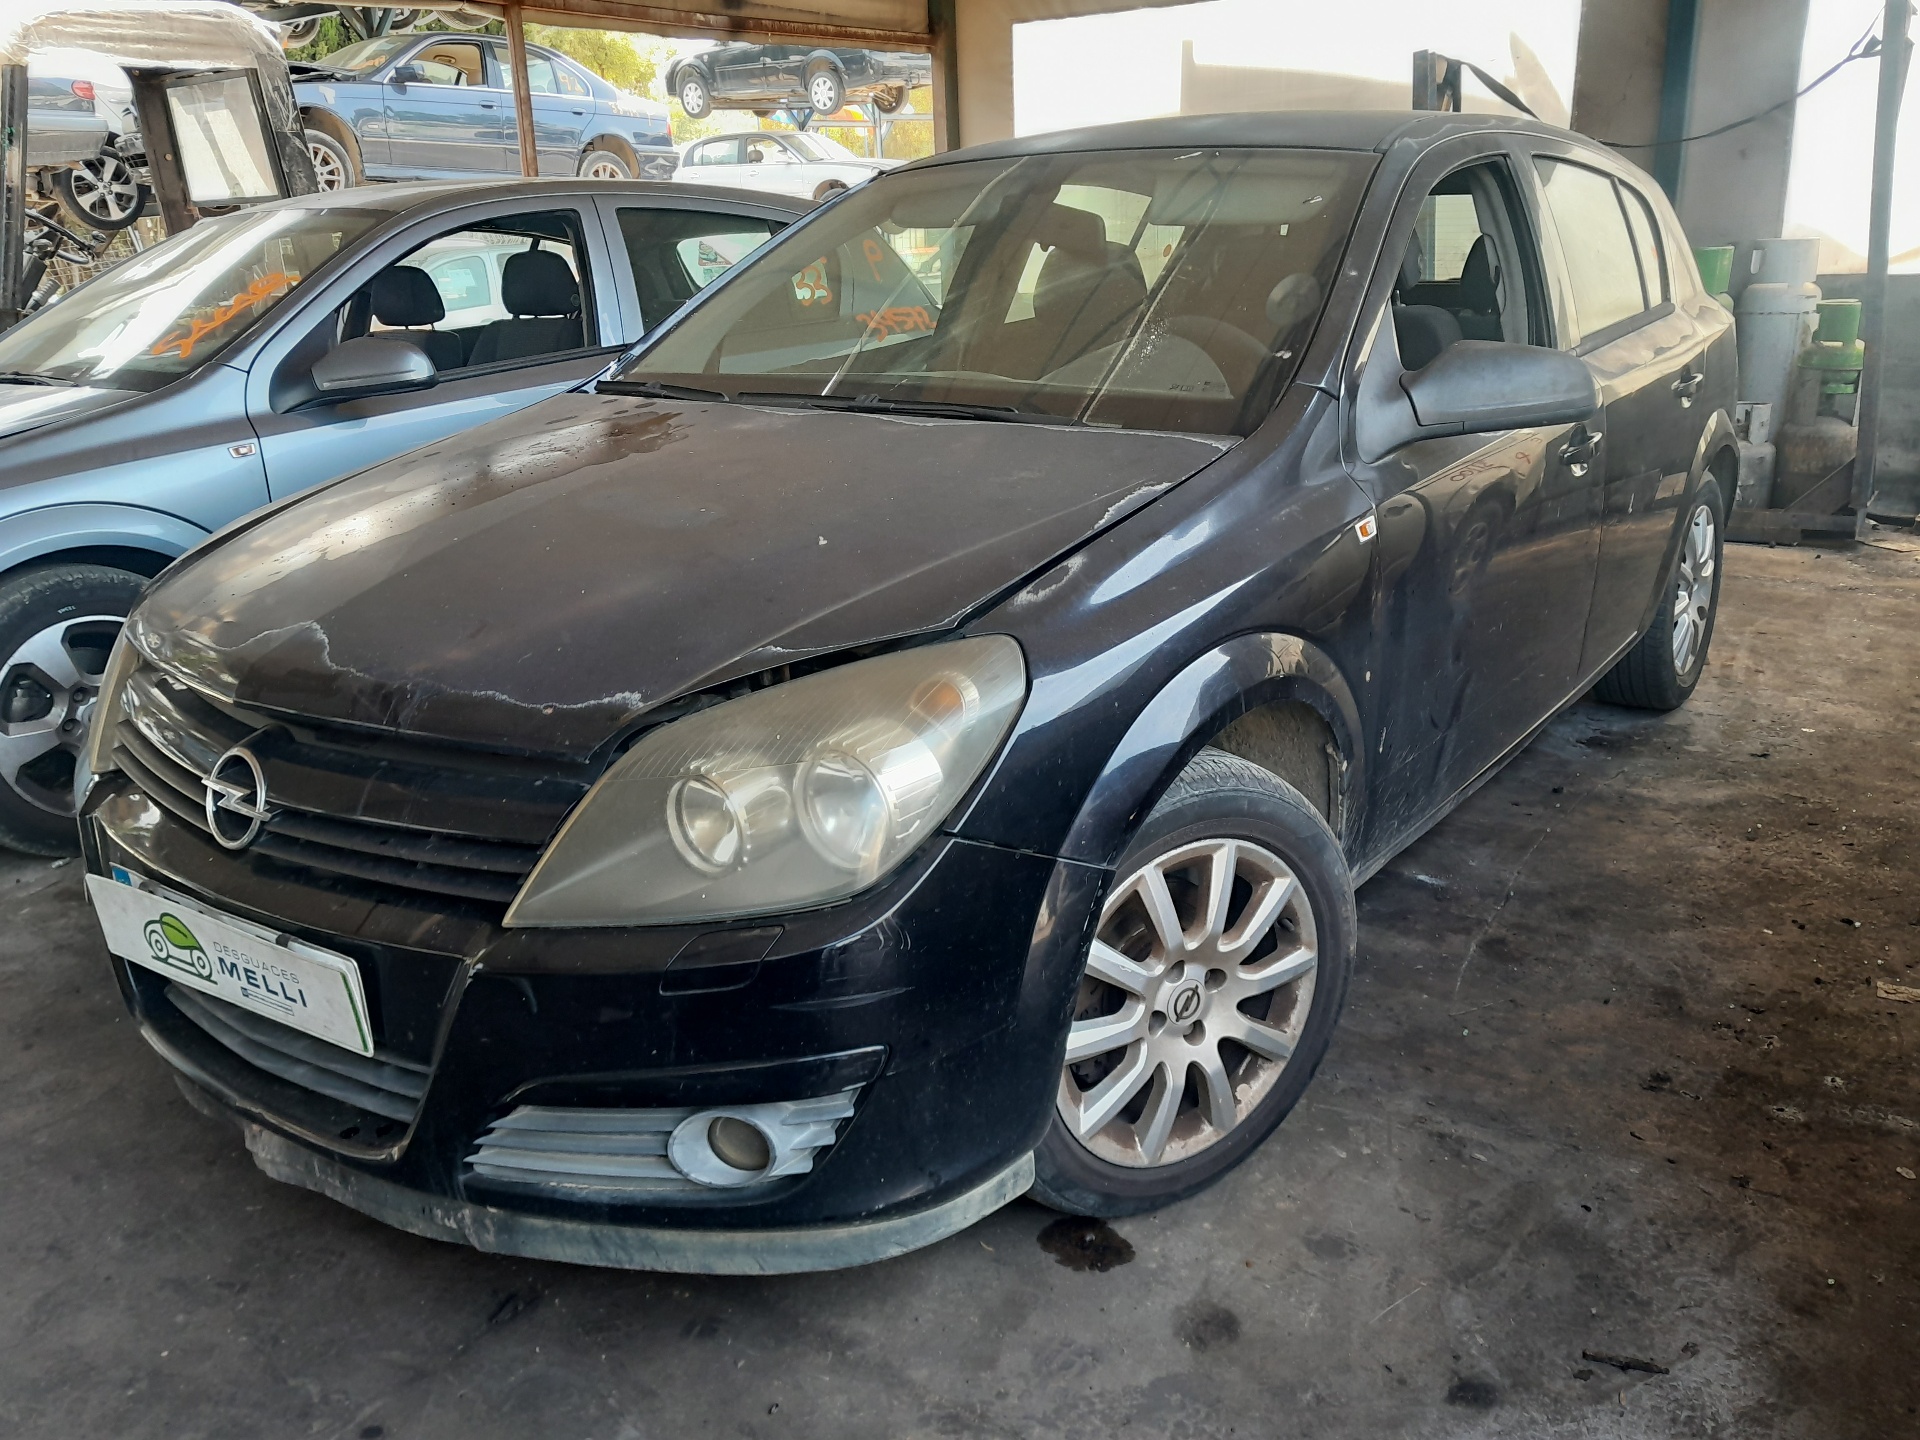 MG Astra J (2009-2020) Other Interior Parts 24463524 25008734